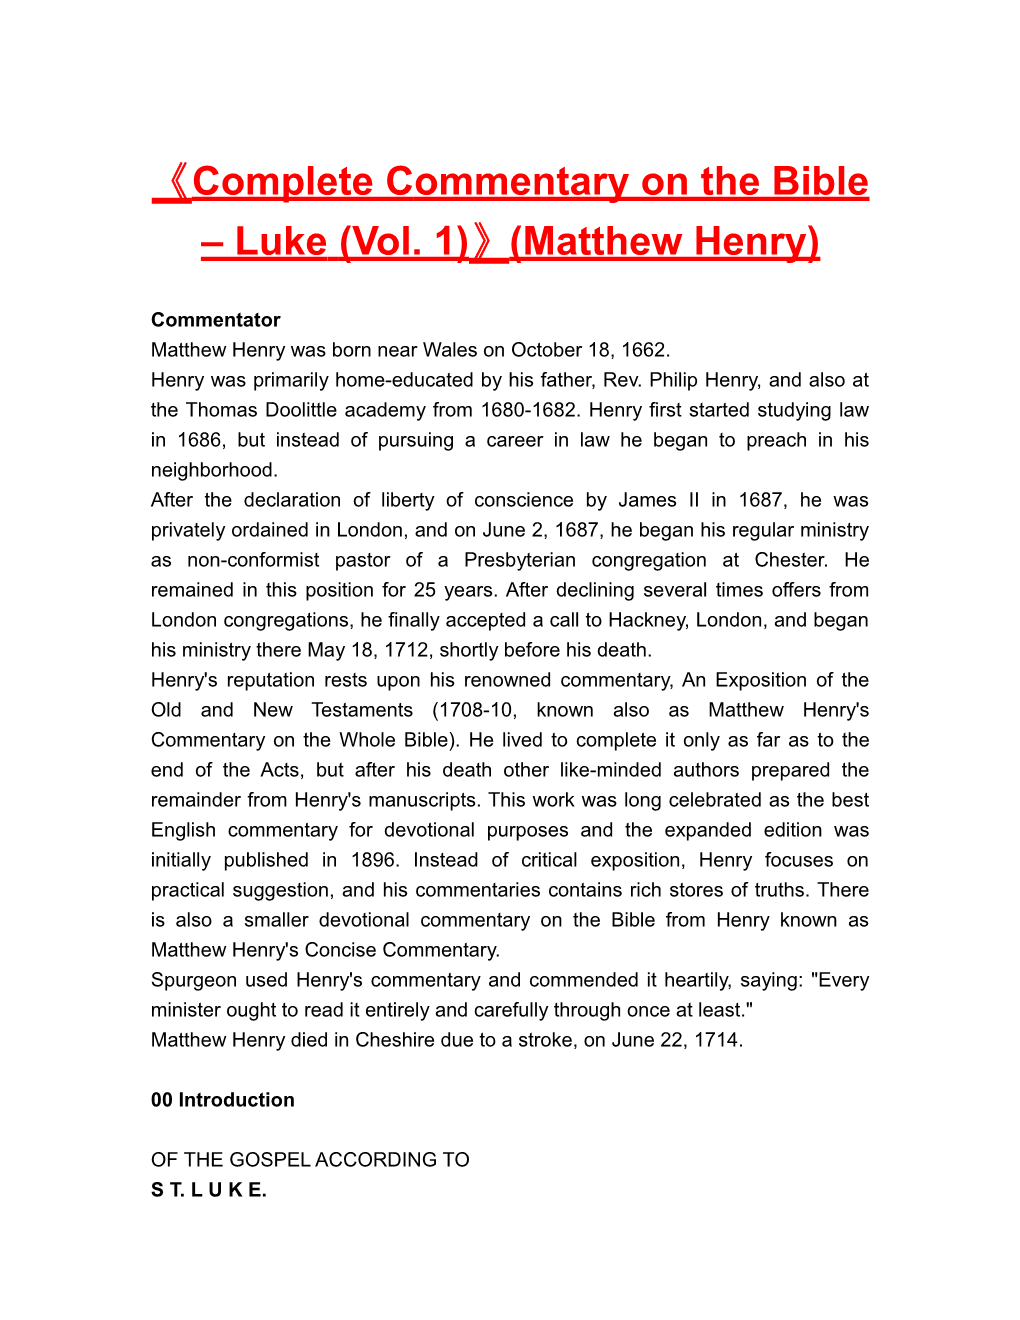 Completecommentary on the Bible Luke(Vol. 1) (Matthew Henry)